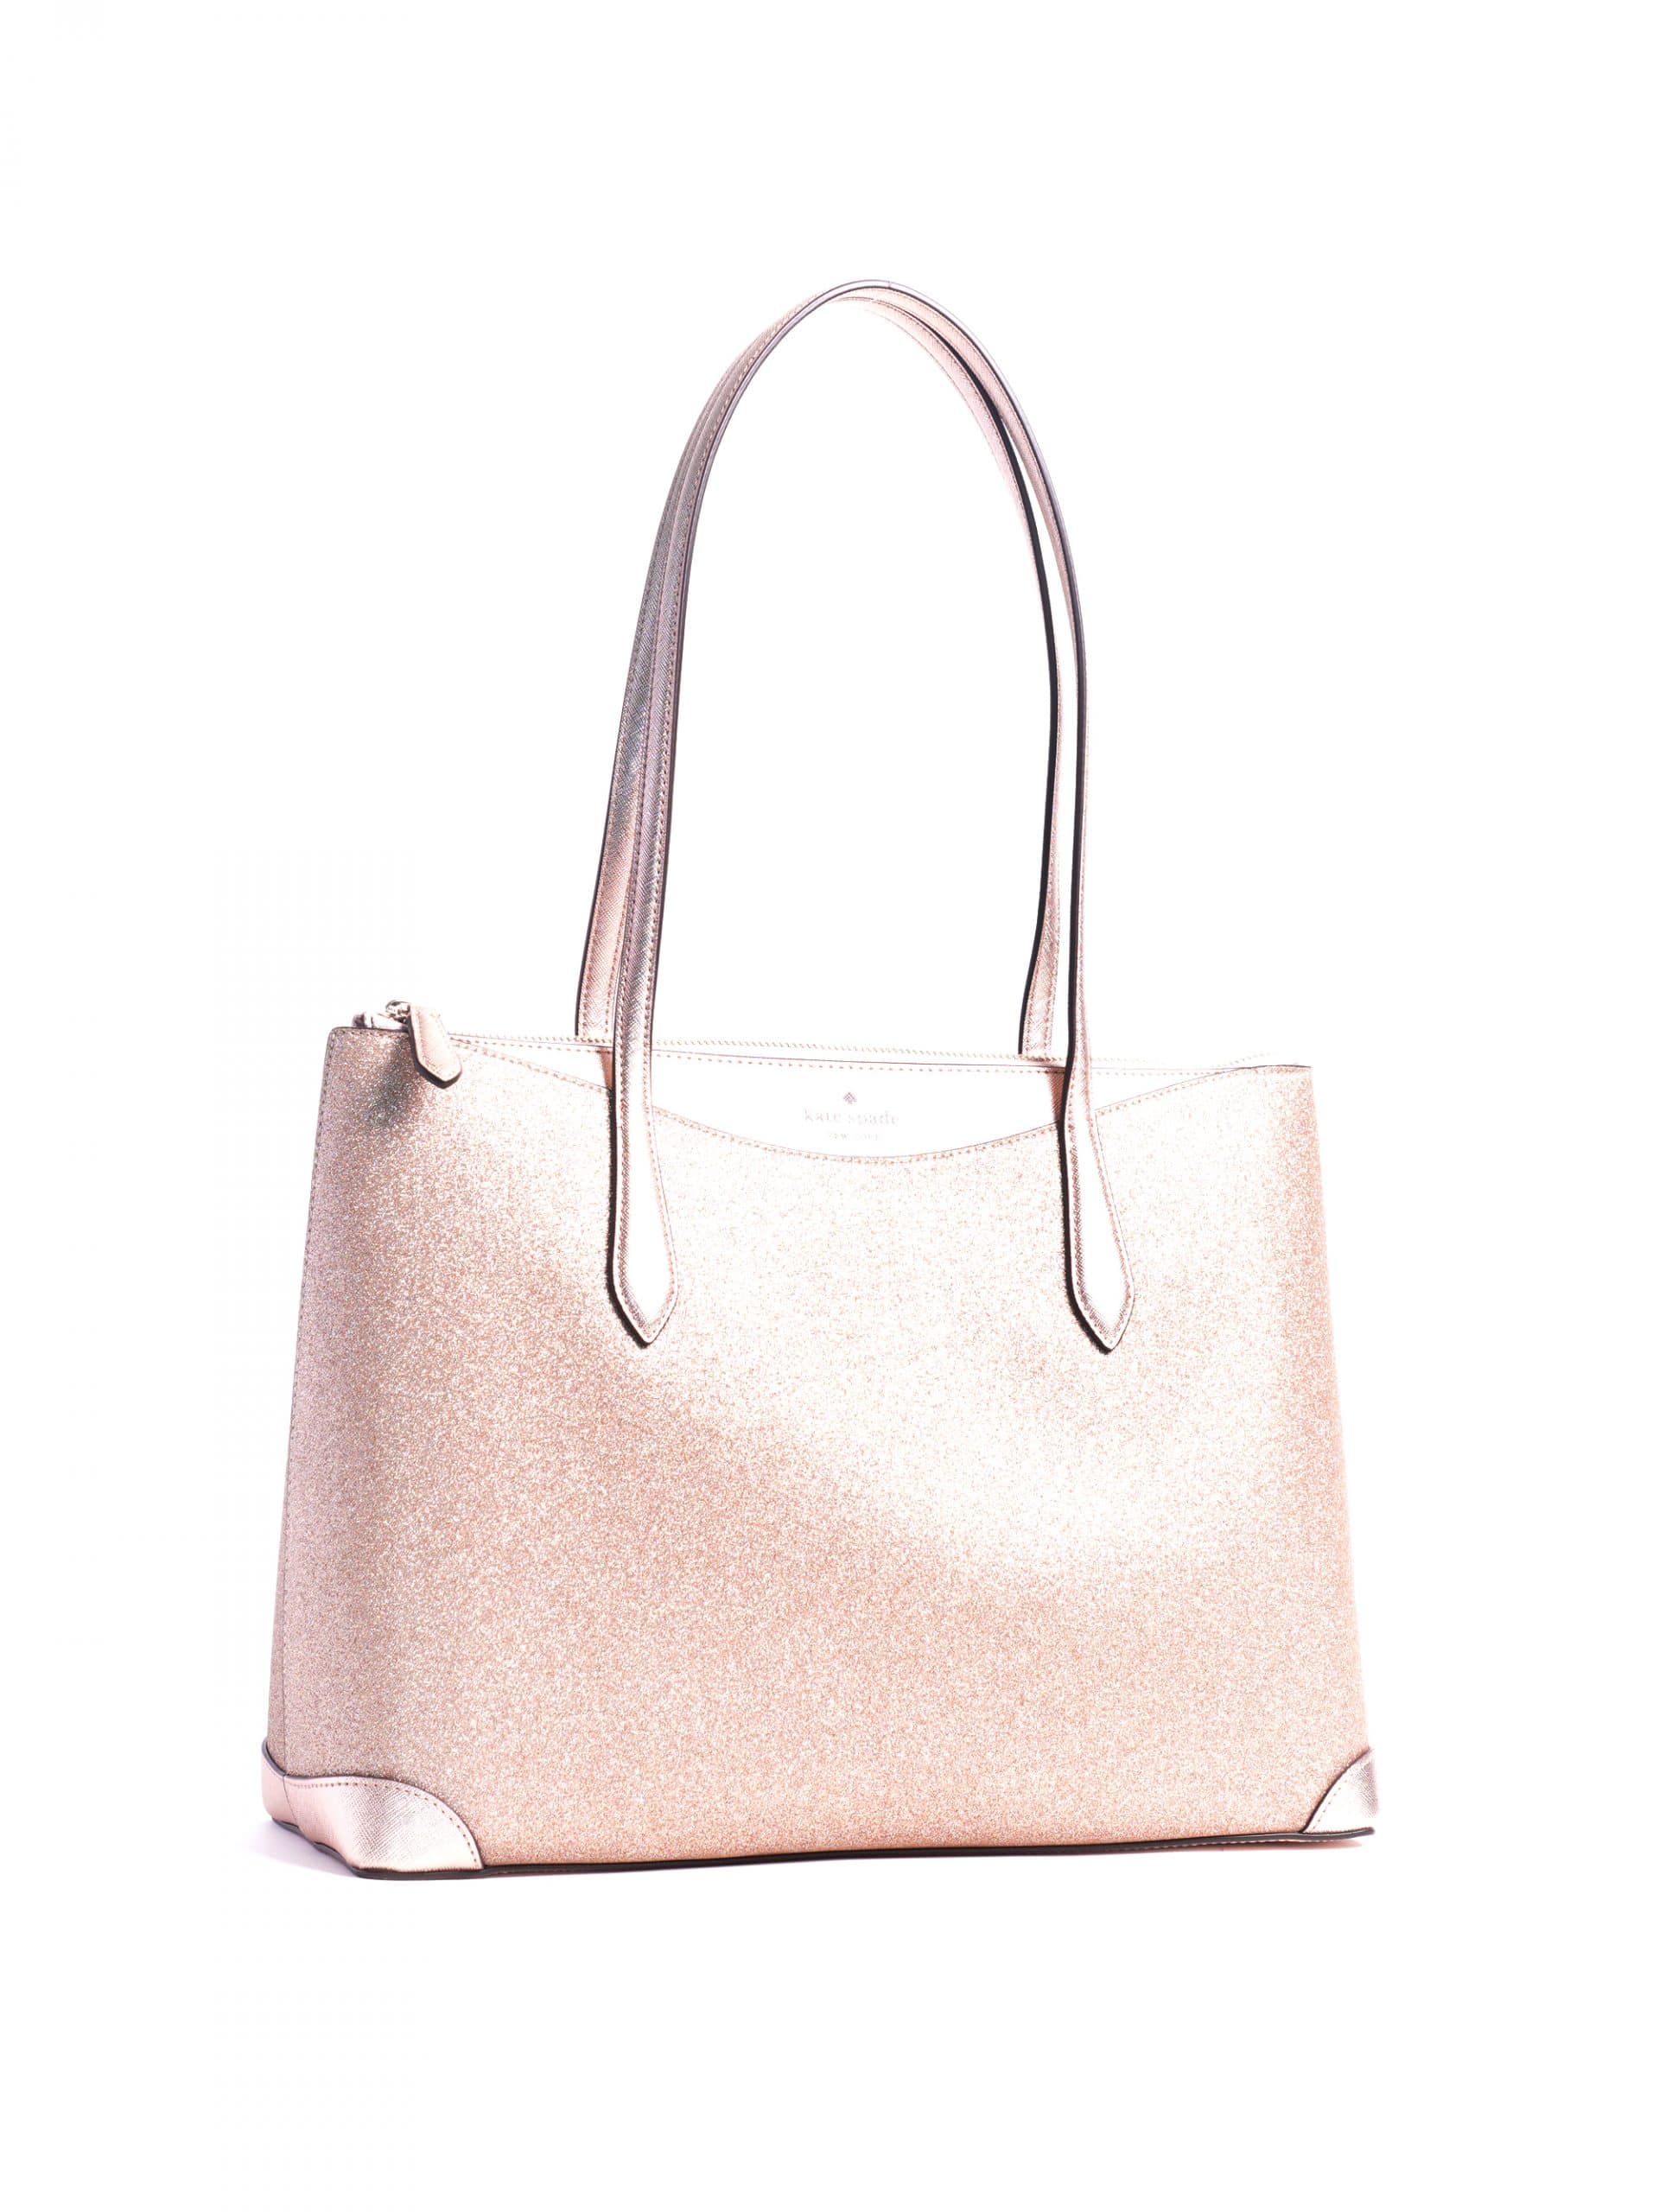 Glimmer Tote | Kate Spade Outlet